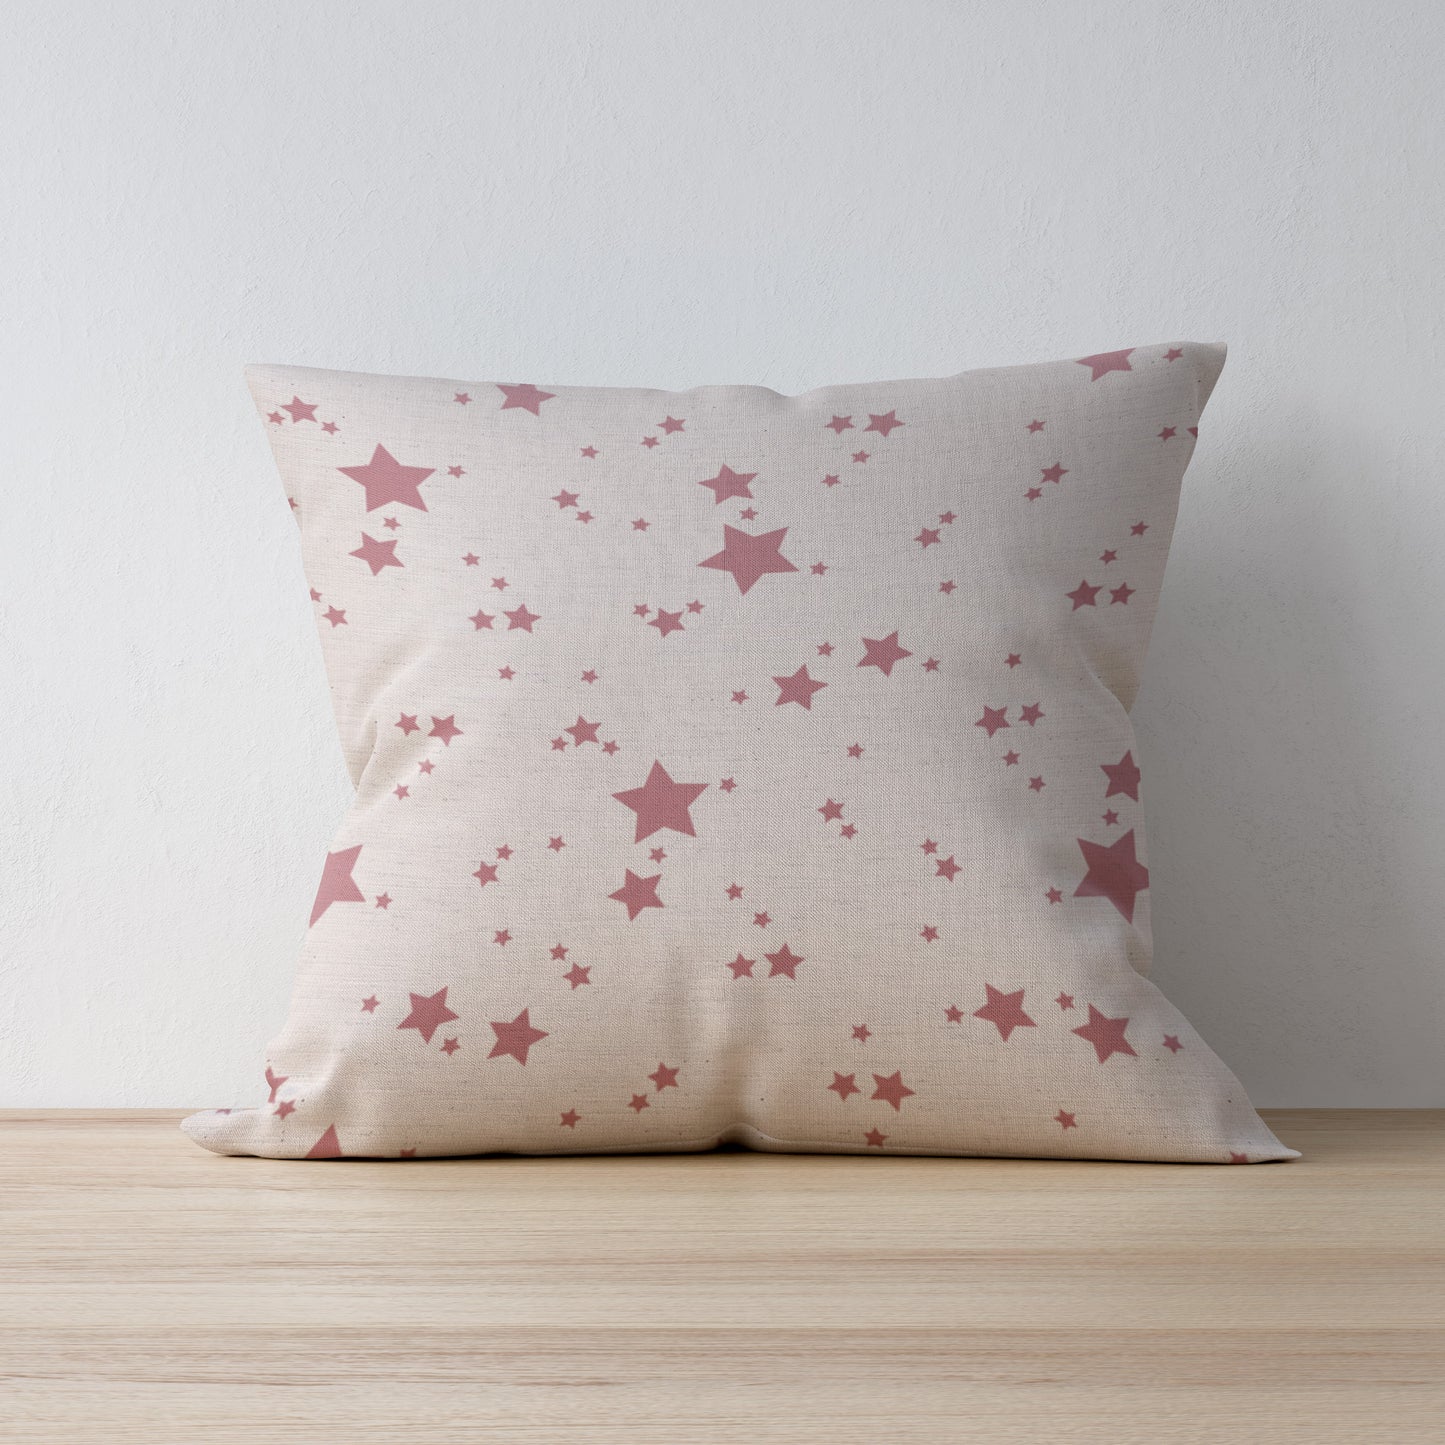 Pink Star Cushion - Designed and made by F&B in Yorkshire - Country home ware - country living - vintage and shabby chic style cushions